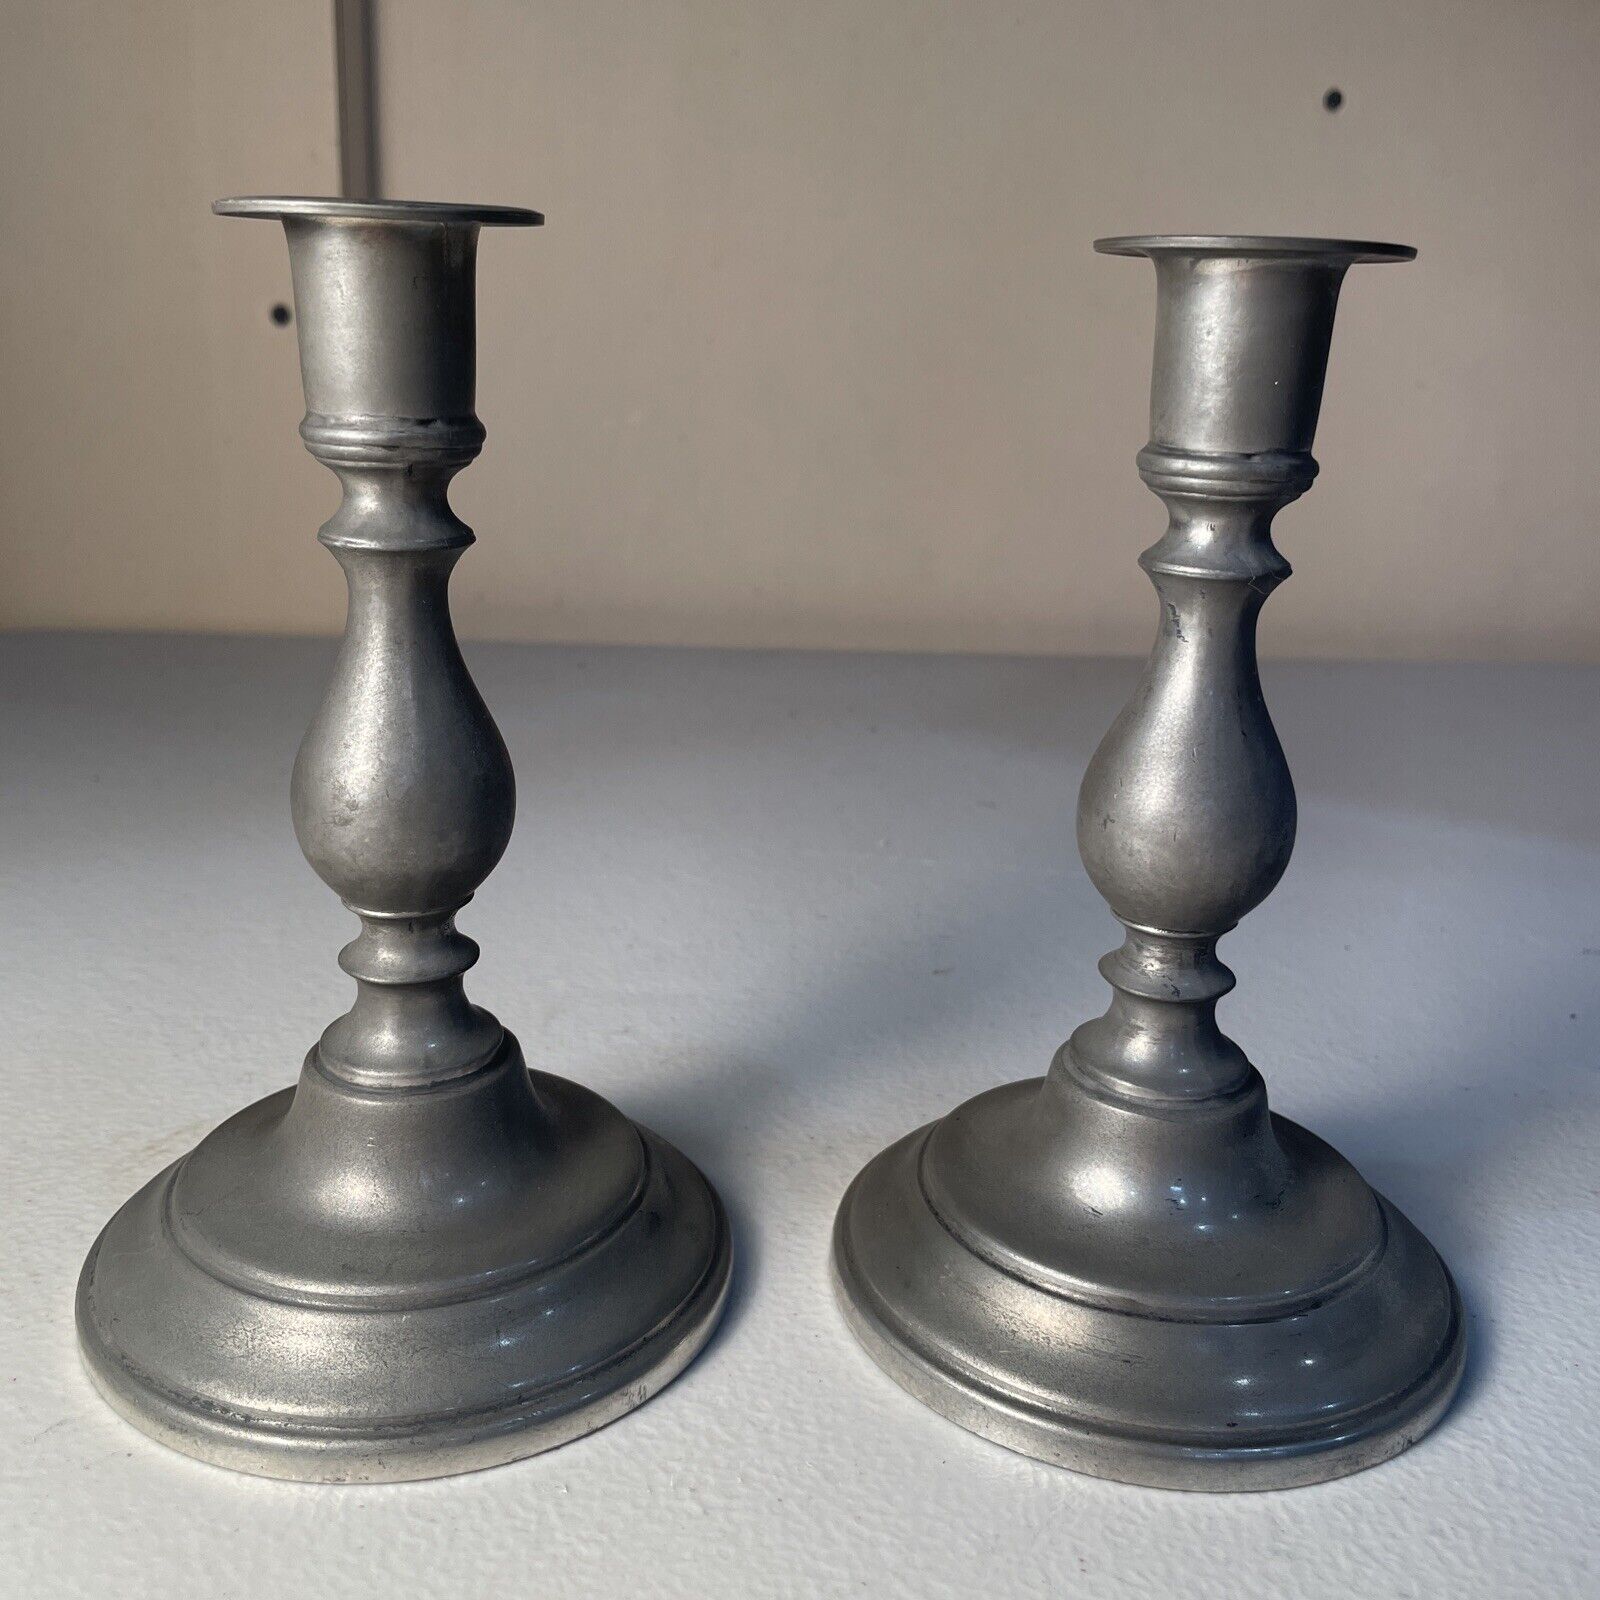 Rare Vintage Old Newbury Pewter Candlesticks With Error Casting Double Strike